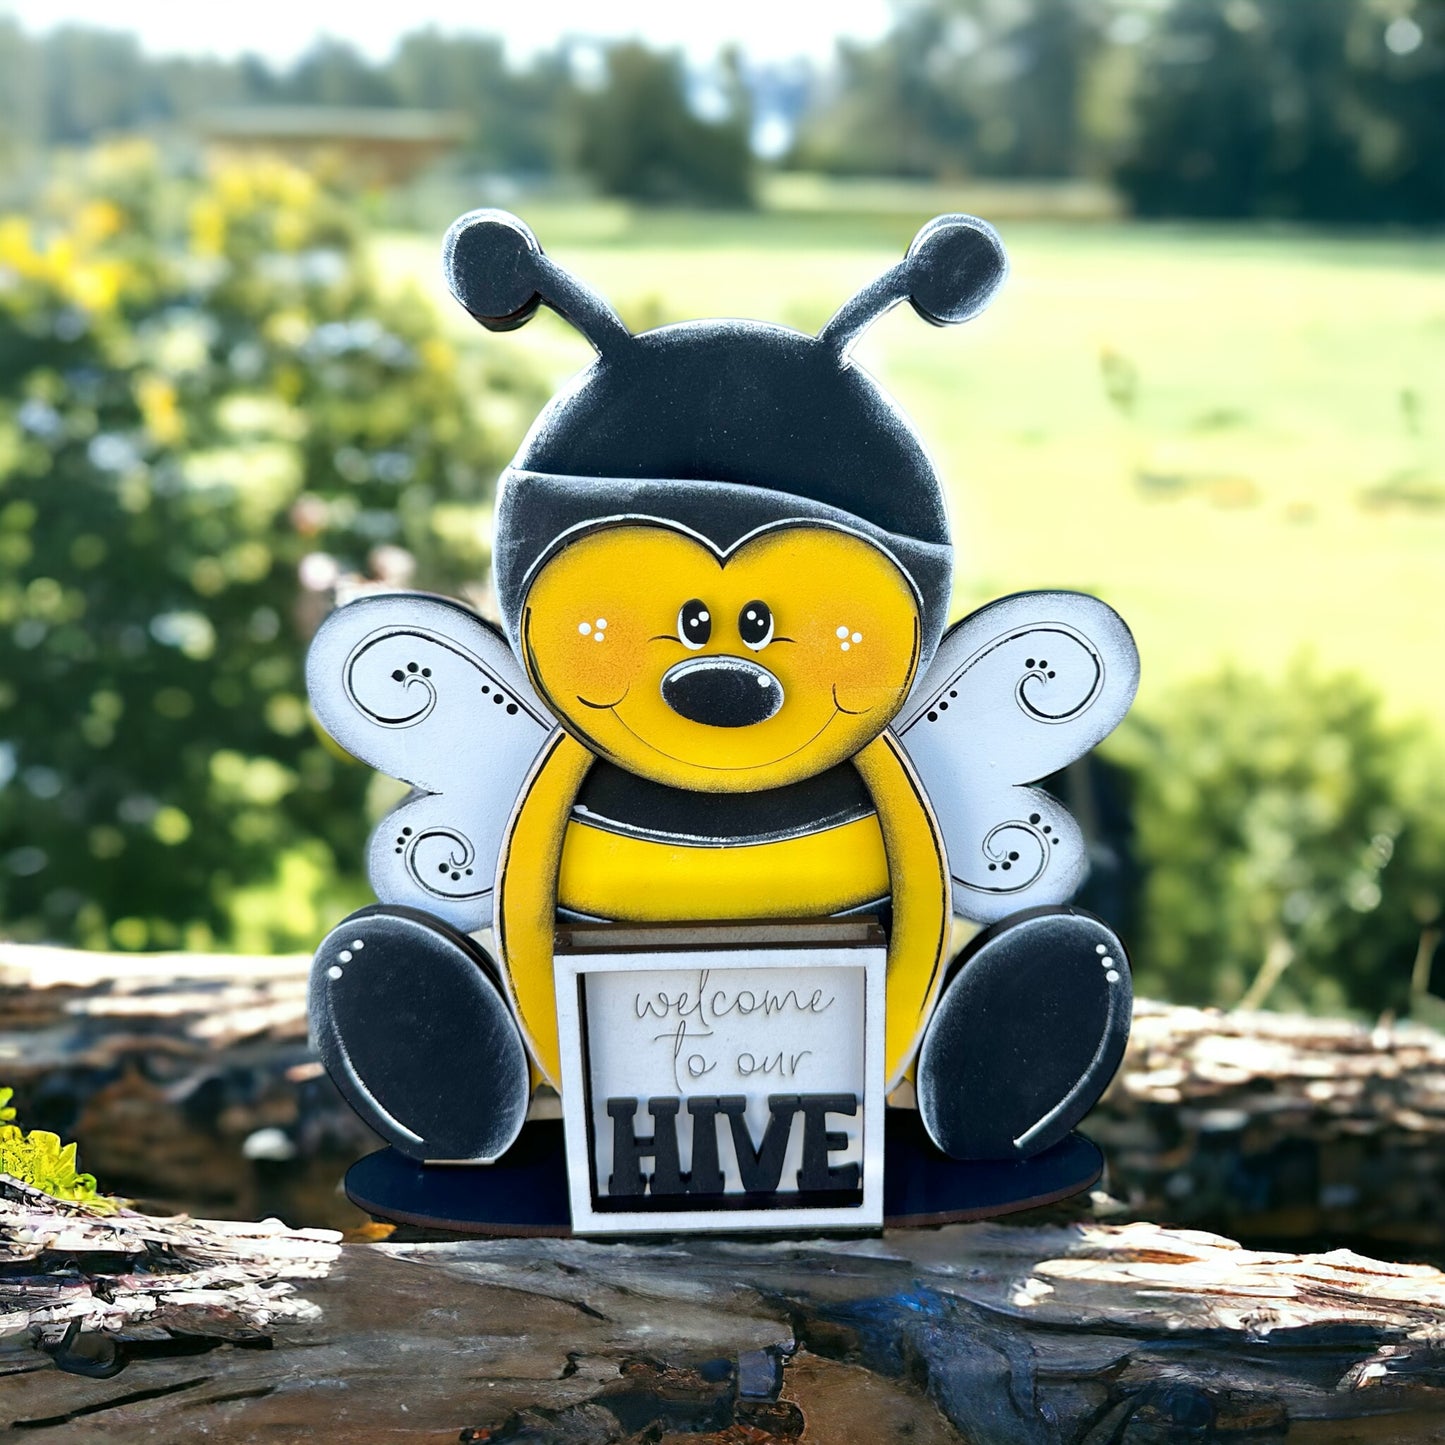 a yellow and black bee figurine with a sign that says welcome to our